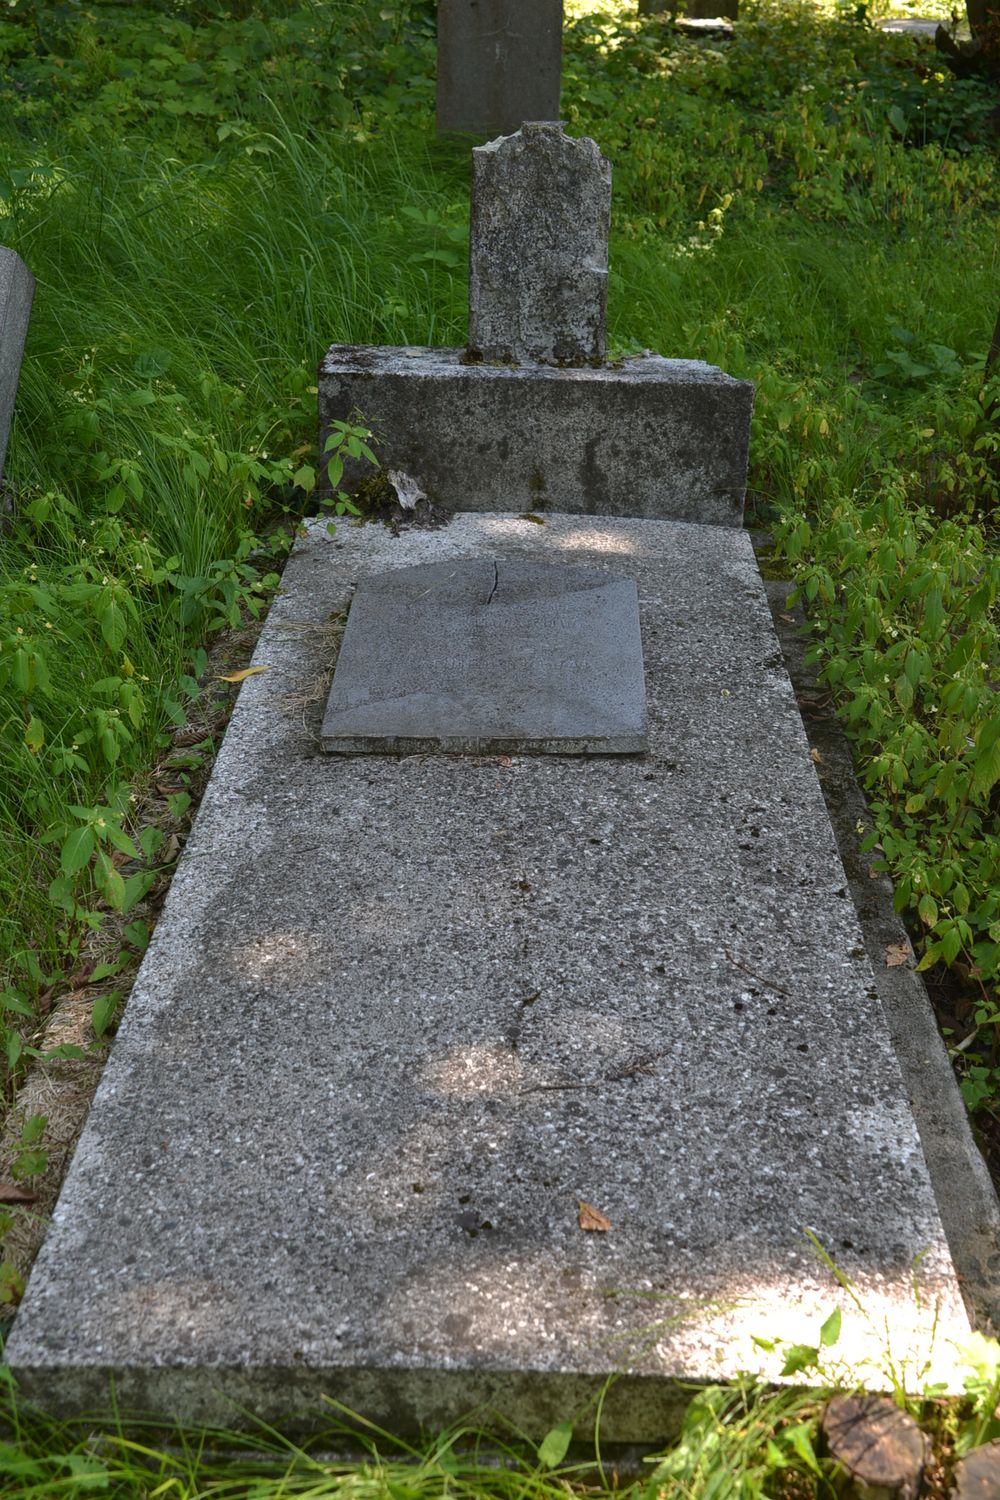 Tomb of Ewa and Emanuel Nowak, cemetery in Karviná Mexico, Czech Republic, as of 2022